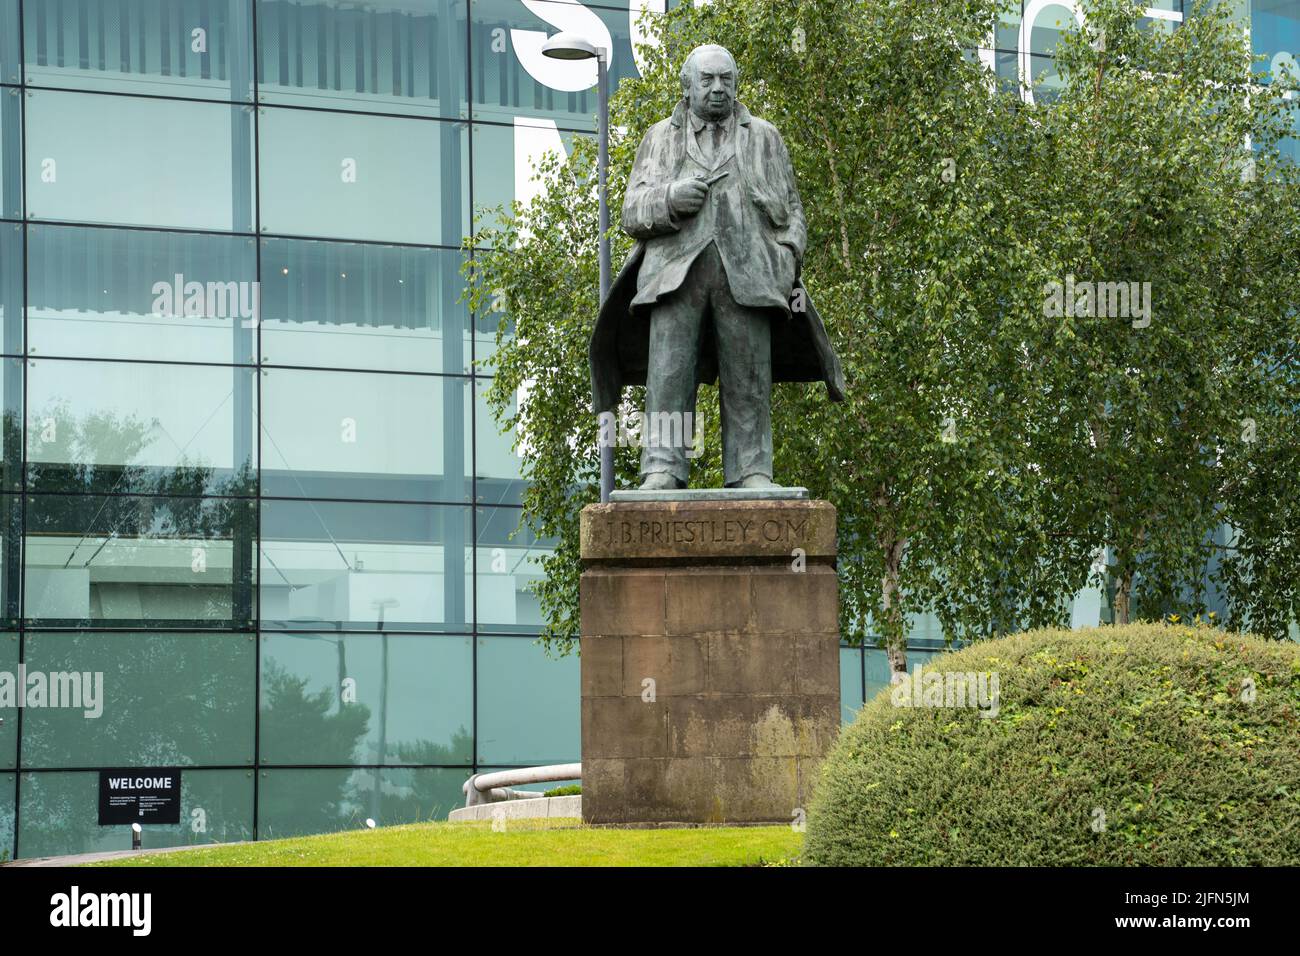 Statue of the British writer J.B. Priestley outside of the National Science and Media Museum in Bradford, UK. Stock Photo